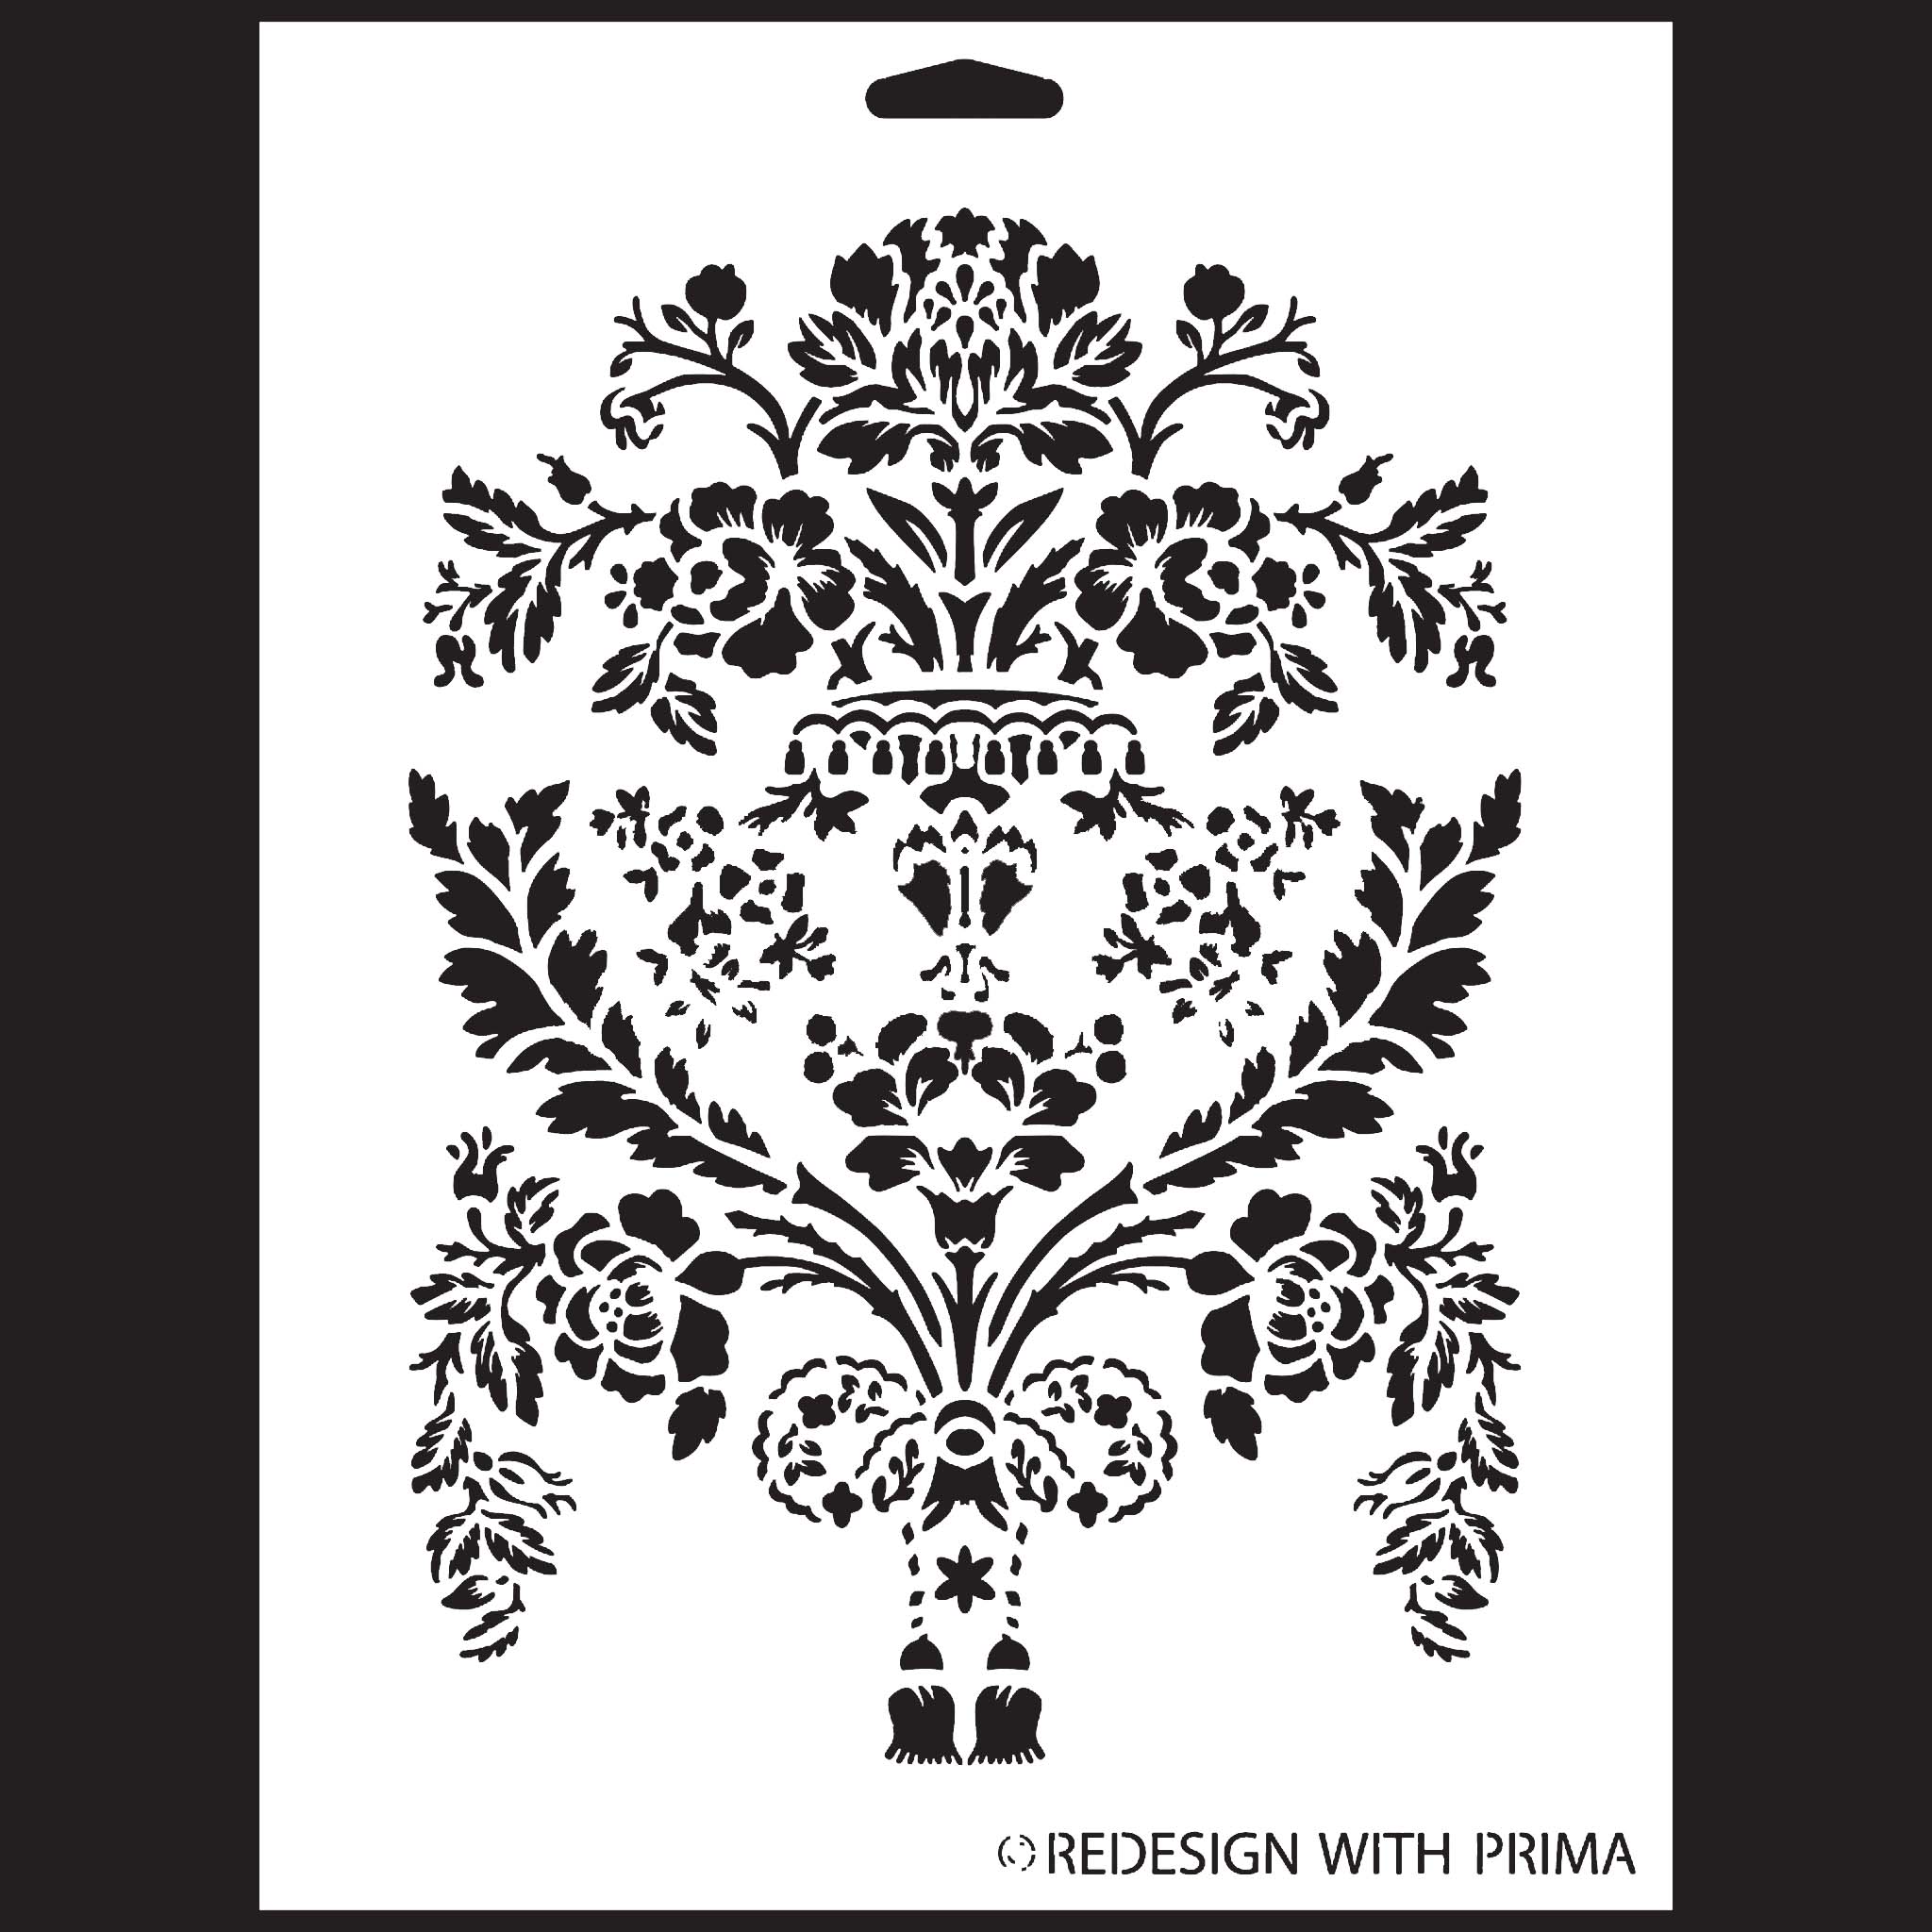 A white stencil against a black background that features a floral design with foliage in the shape of a large European vintage vase.